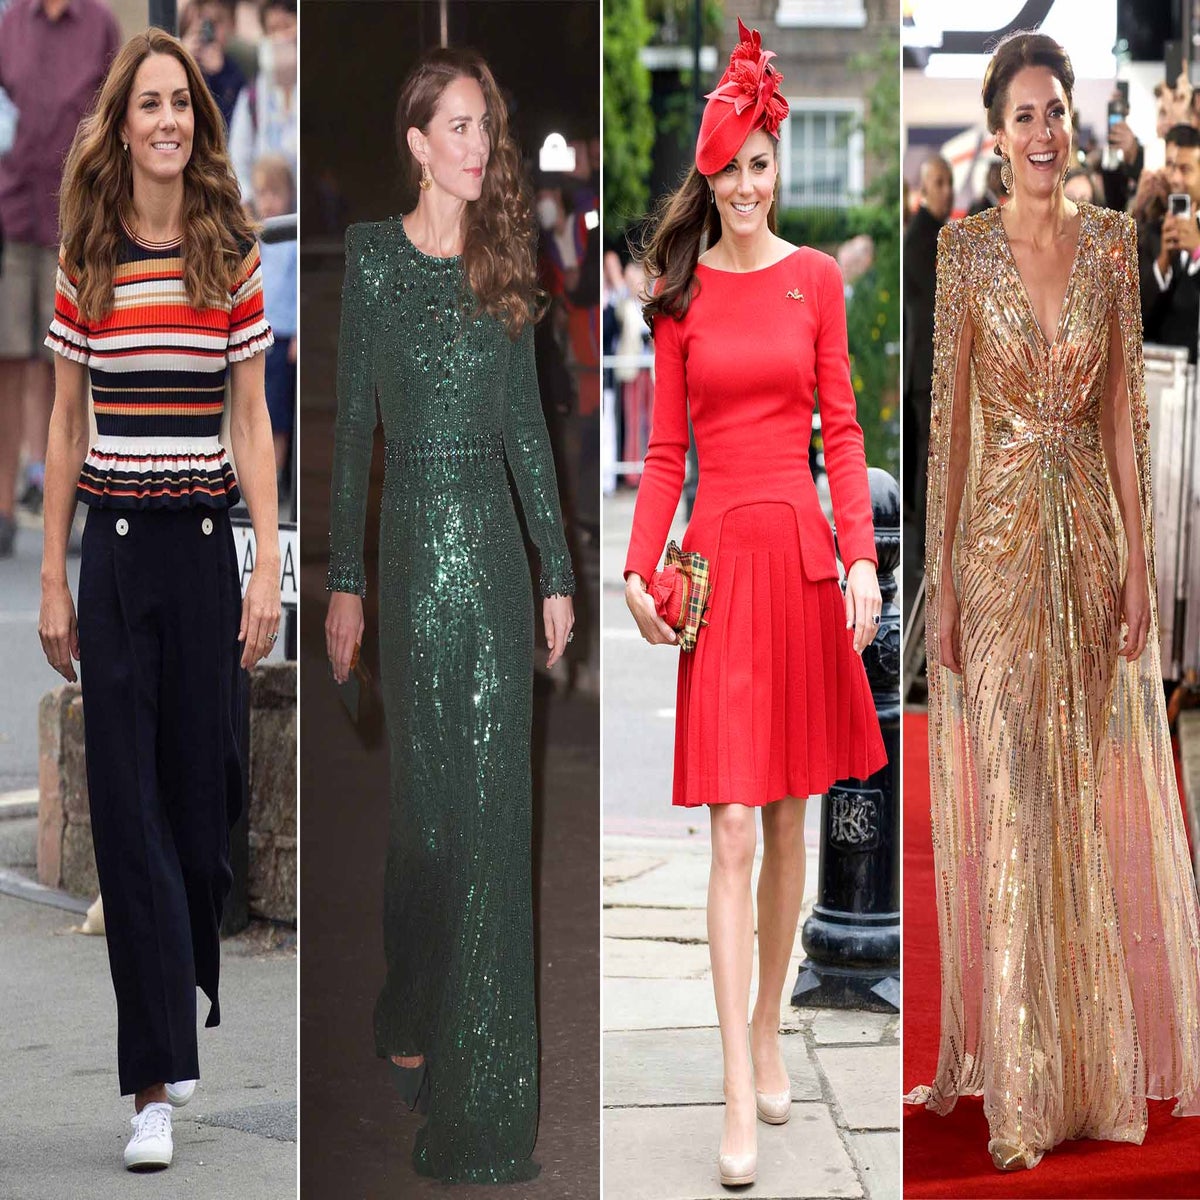 Kate Middleton's Best Fashion Looks - Duchess of Cambridge's Chic Outfits